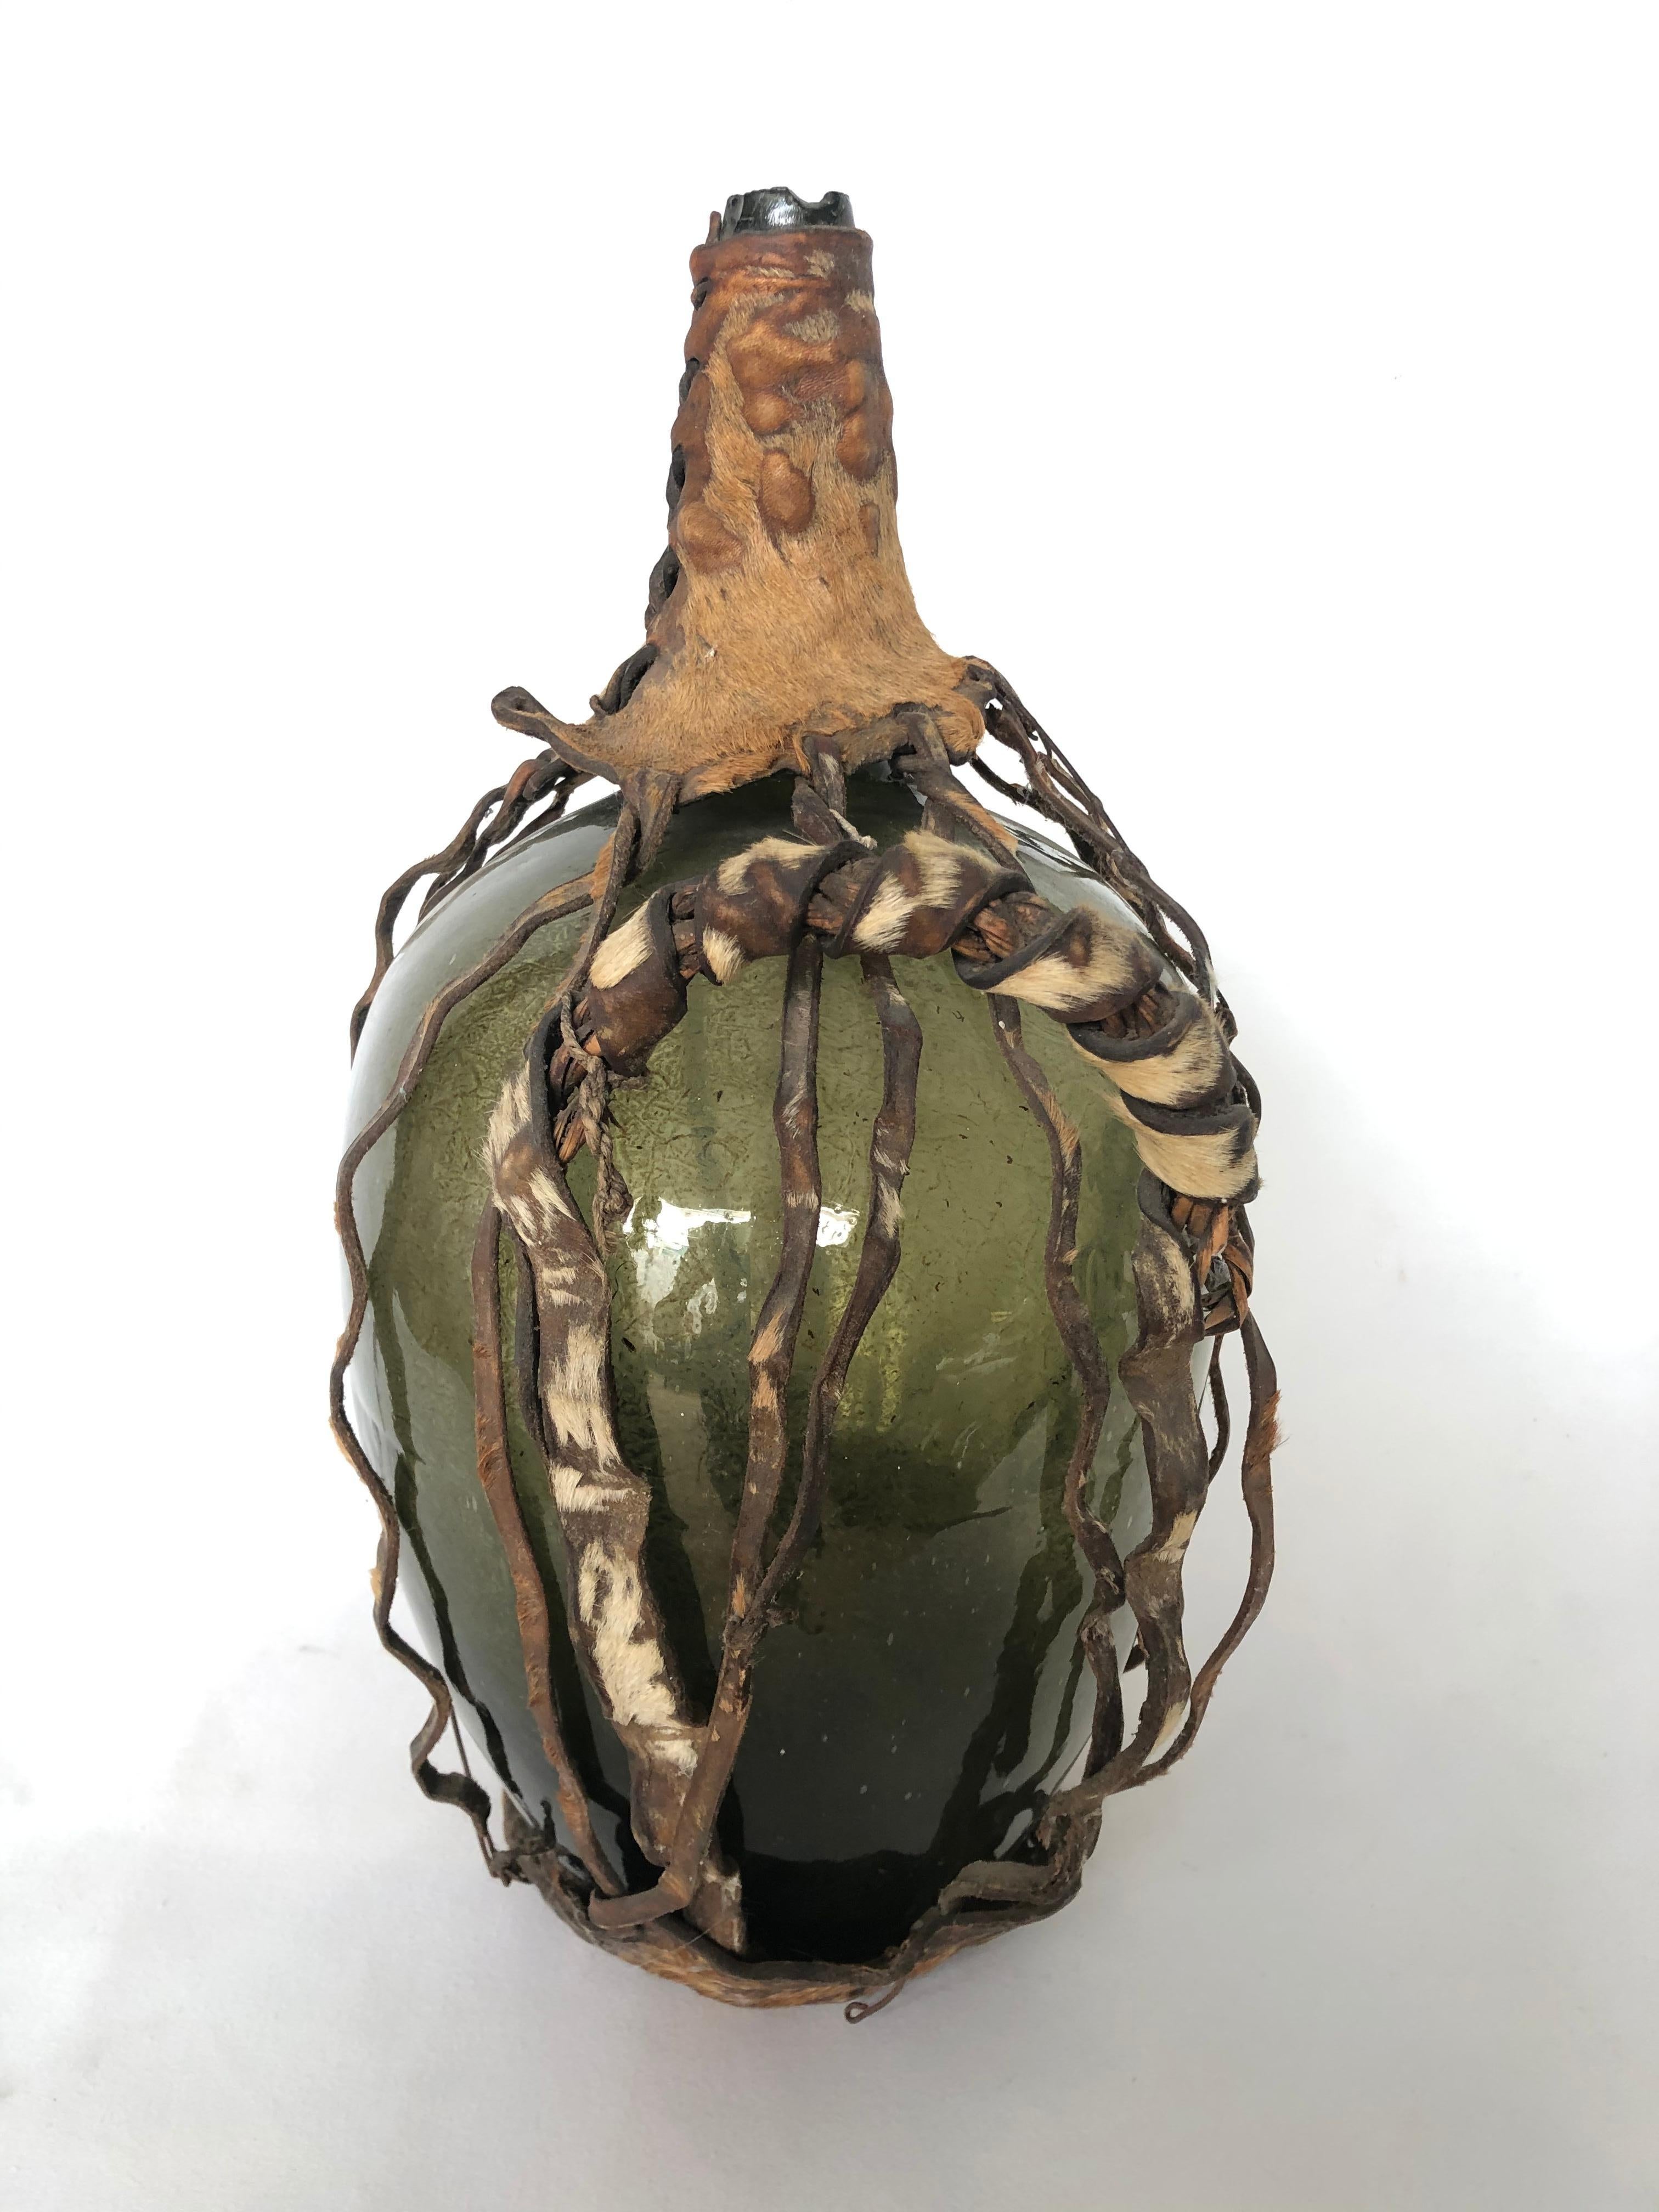 Rustic Rare to Find Green Blown Glass Demijohn from Southern Mexico, Mid 19th Century